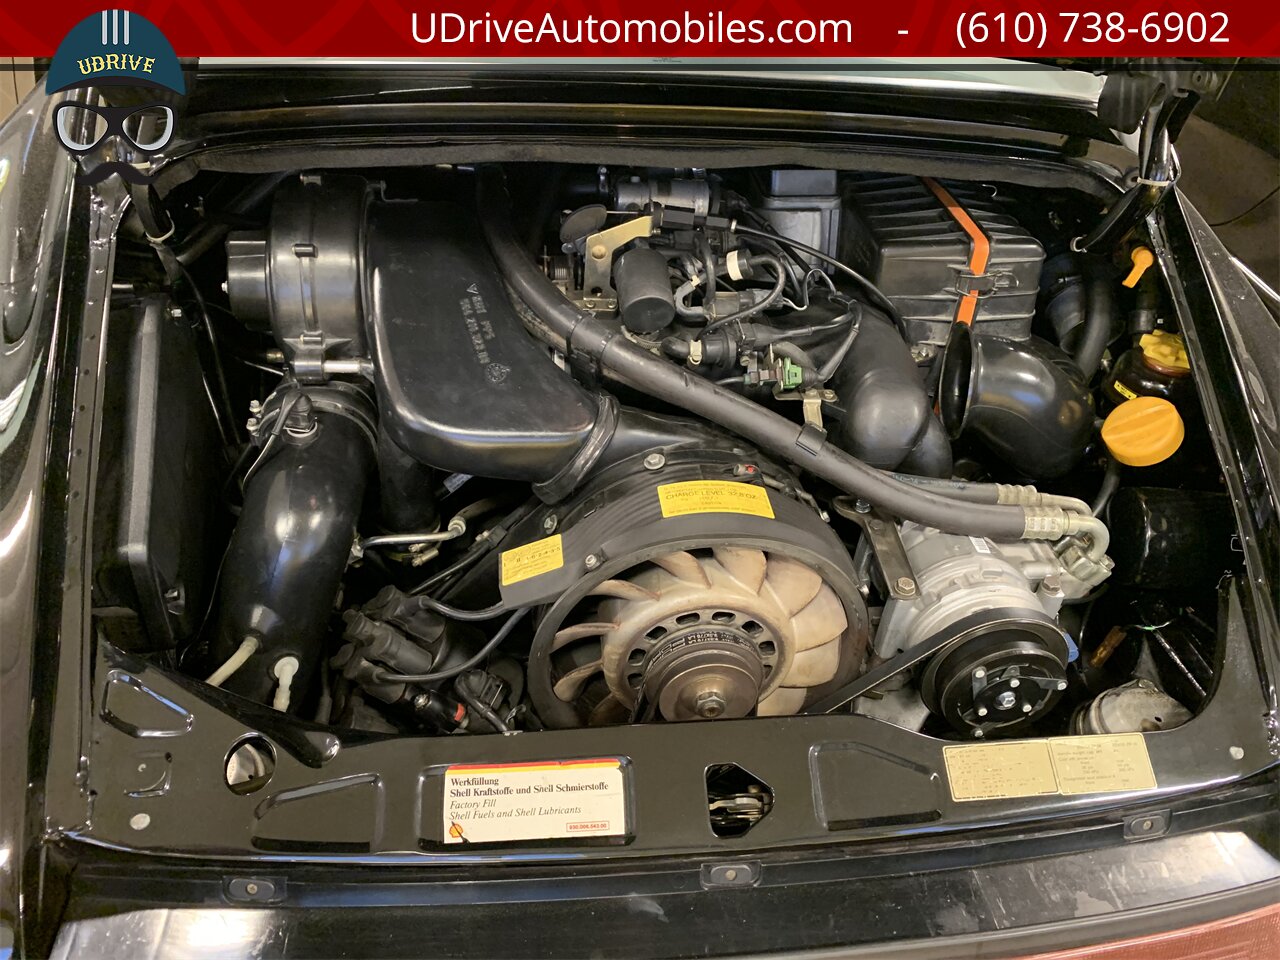 1991 Porsche 911 Carrera 2 964 Limited Slip Differential LSD  Service History Over $16k Spent Since 2018 - Photo 53 - West Chester, PA 19382